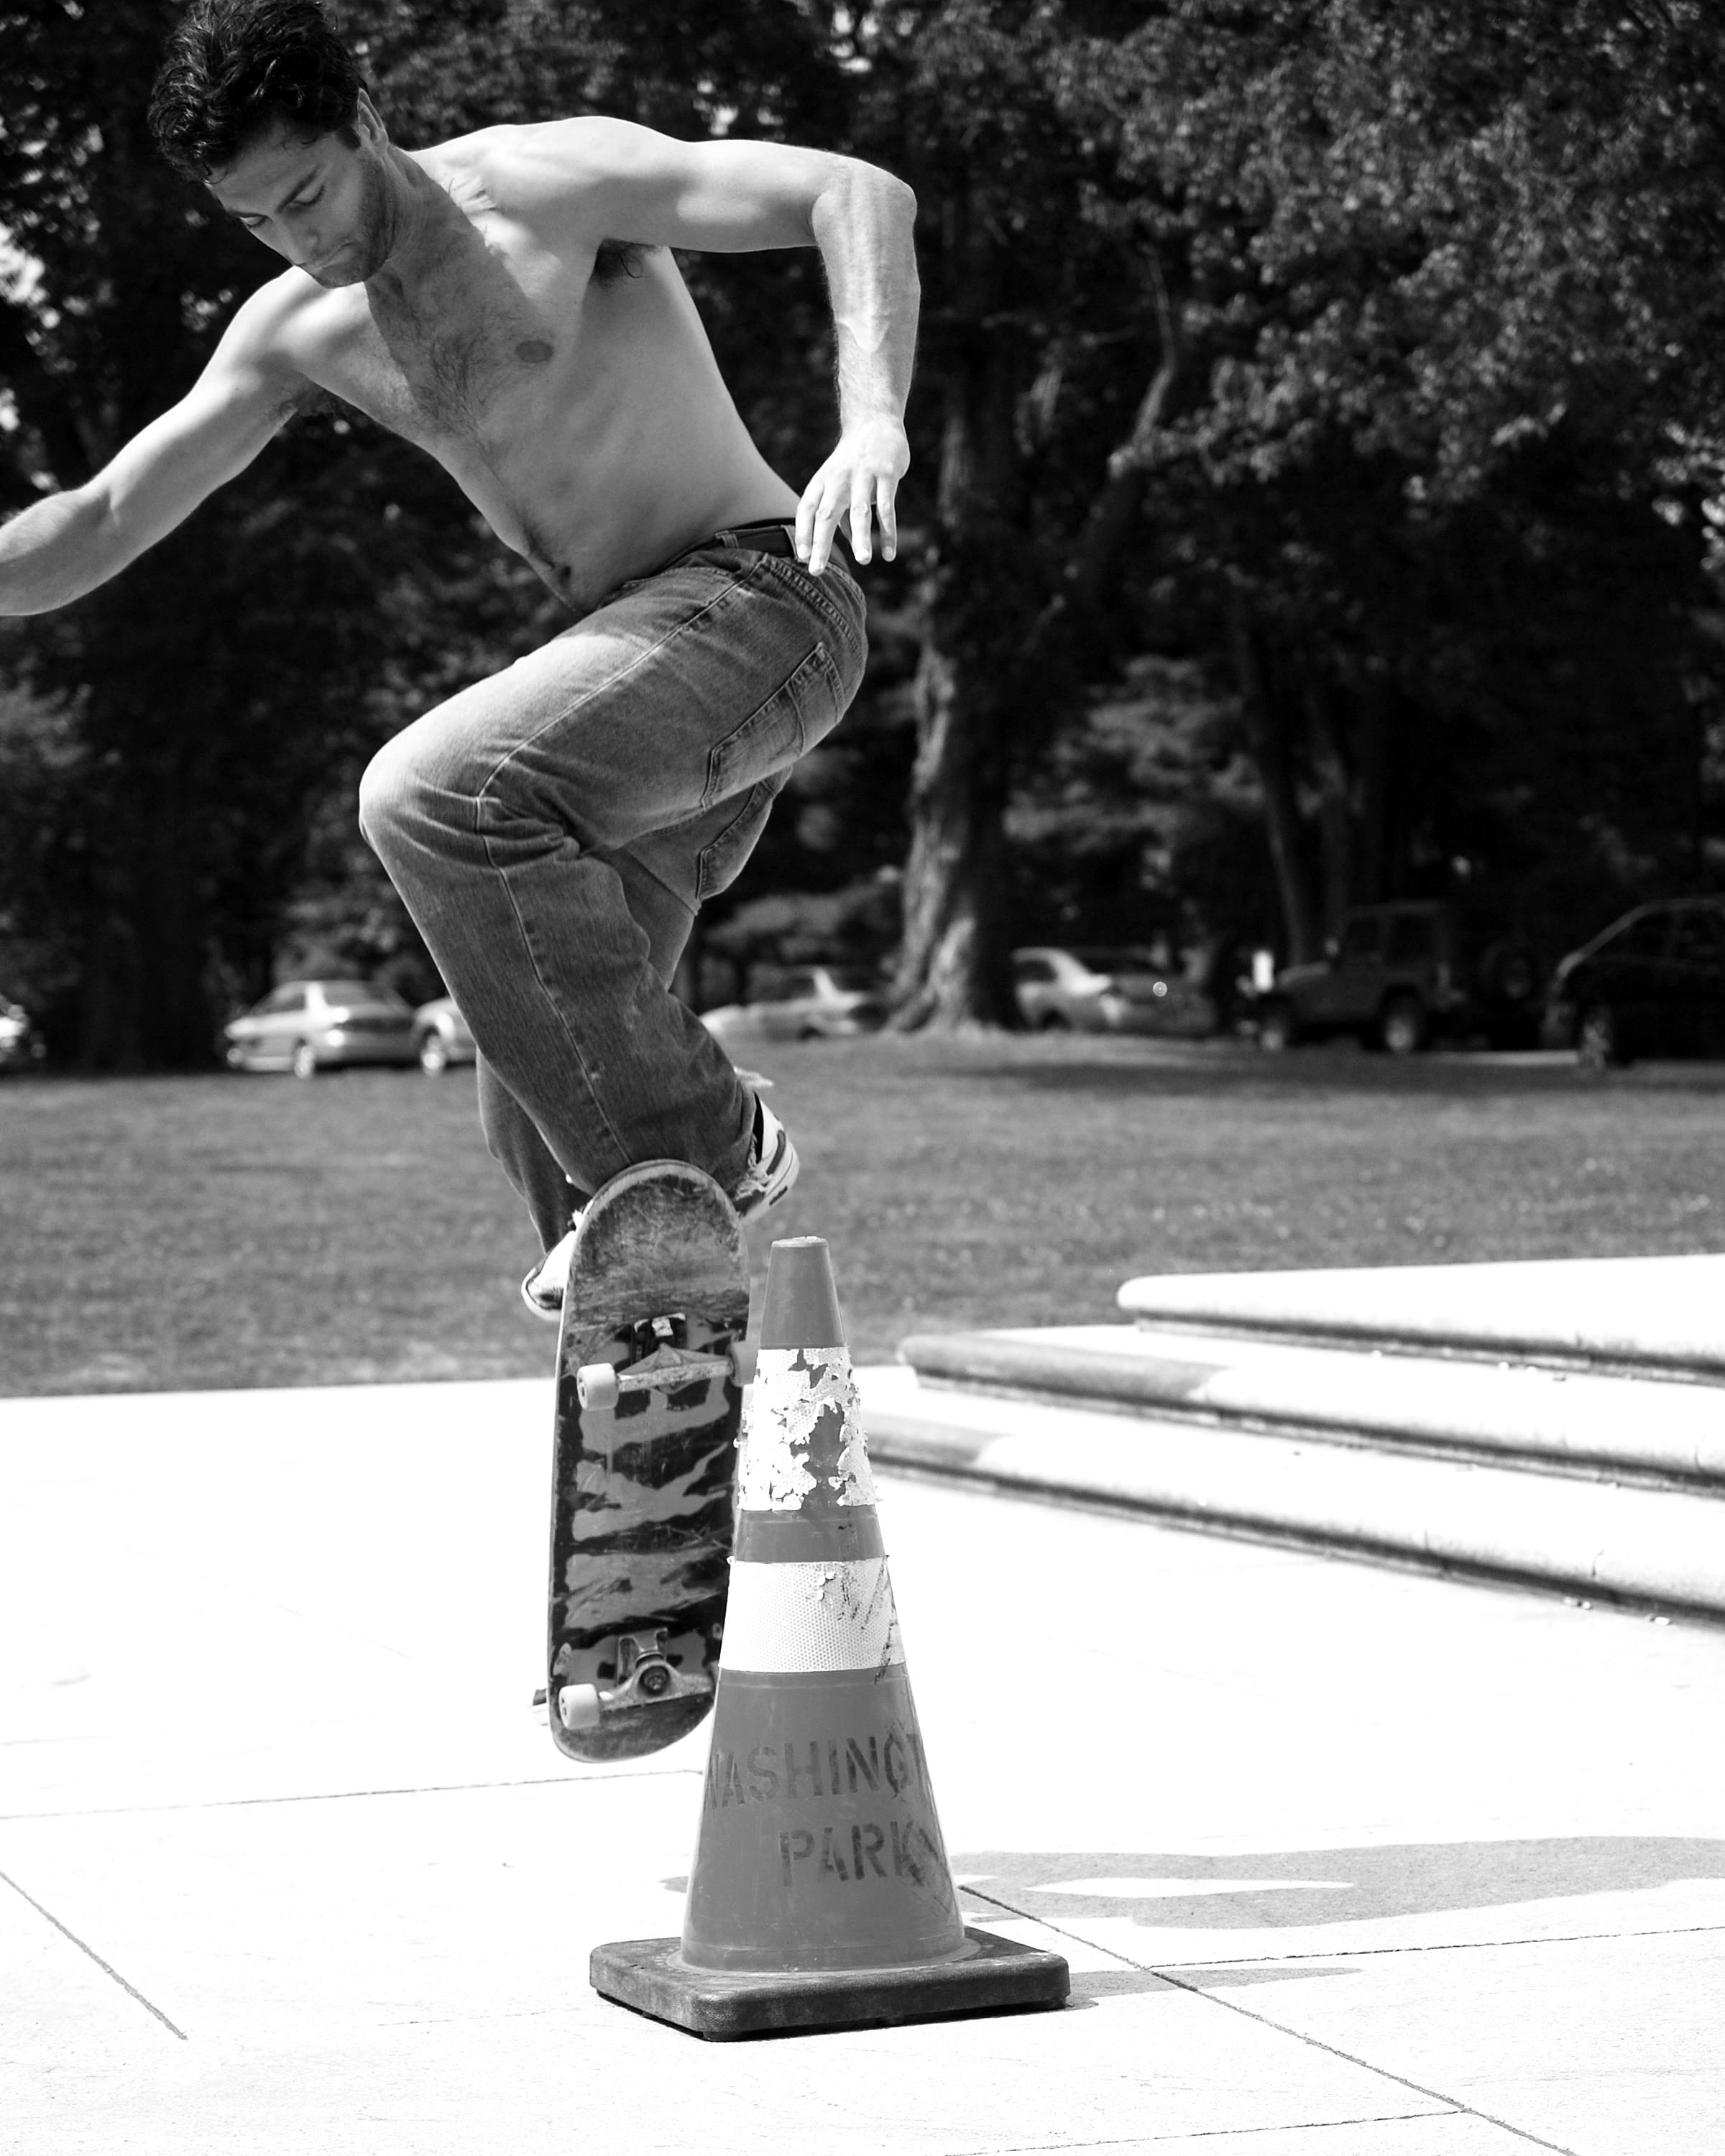 Skater doing a tip, representing these awesome Wordpress tips and tricks for non-geeks and newbies.